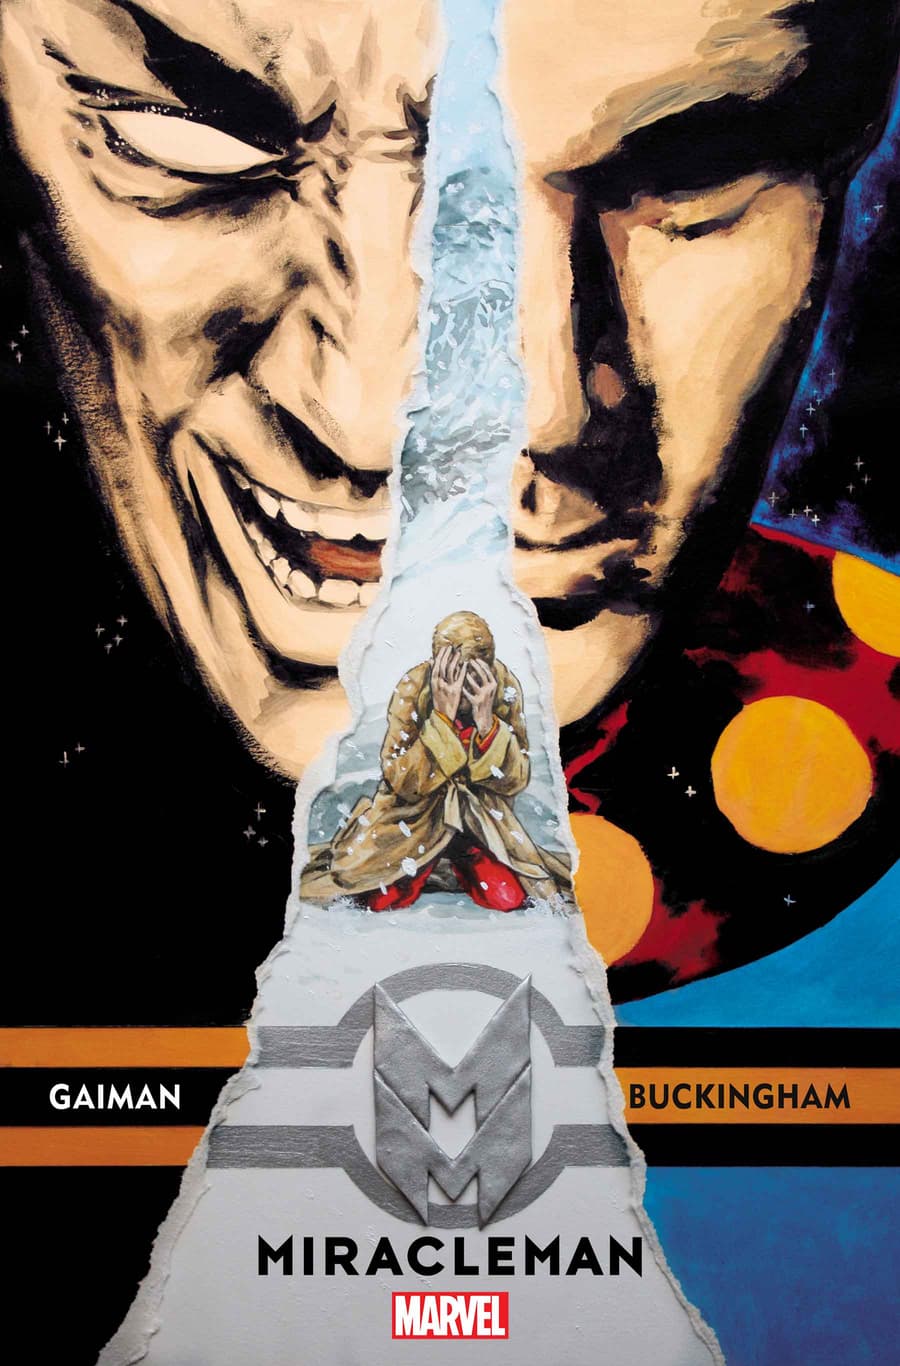 MIRACLEMAN BY GAIMAN & BUCKINGHAM: THE SILVER AGE #3 Art and Cover by MARK BUCKINGHAM